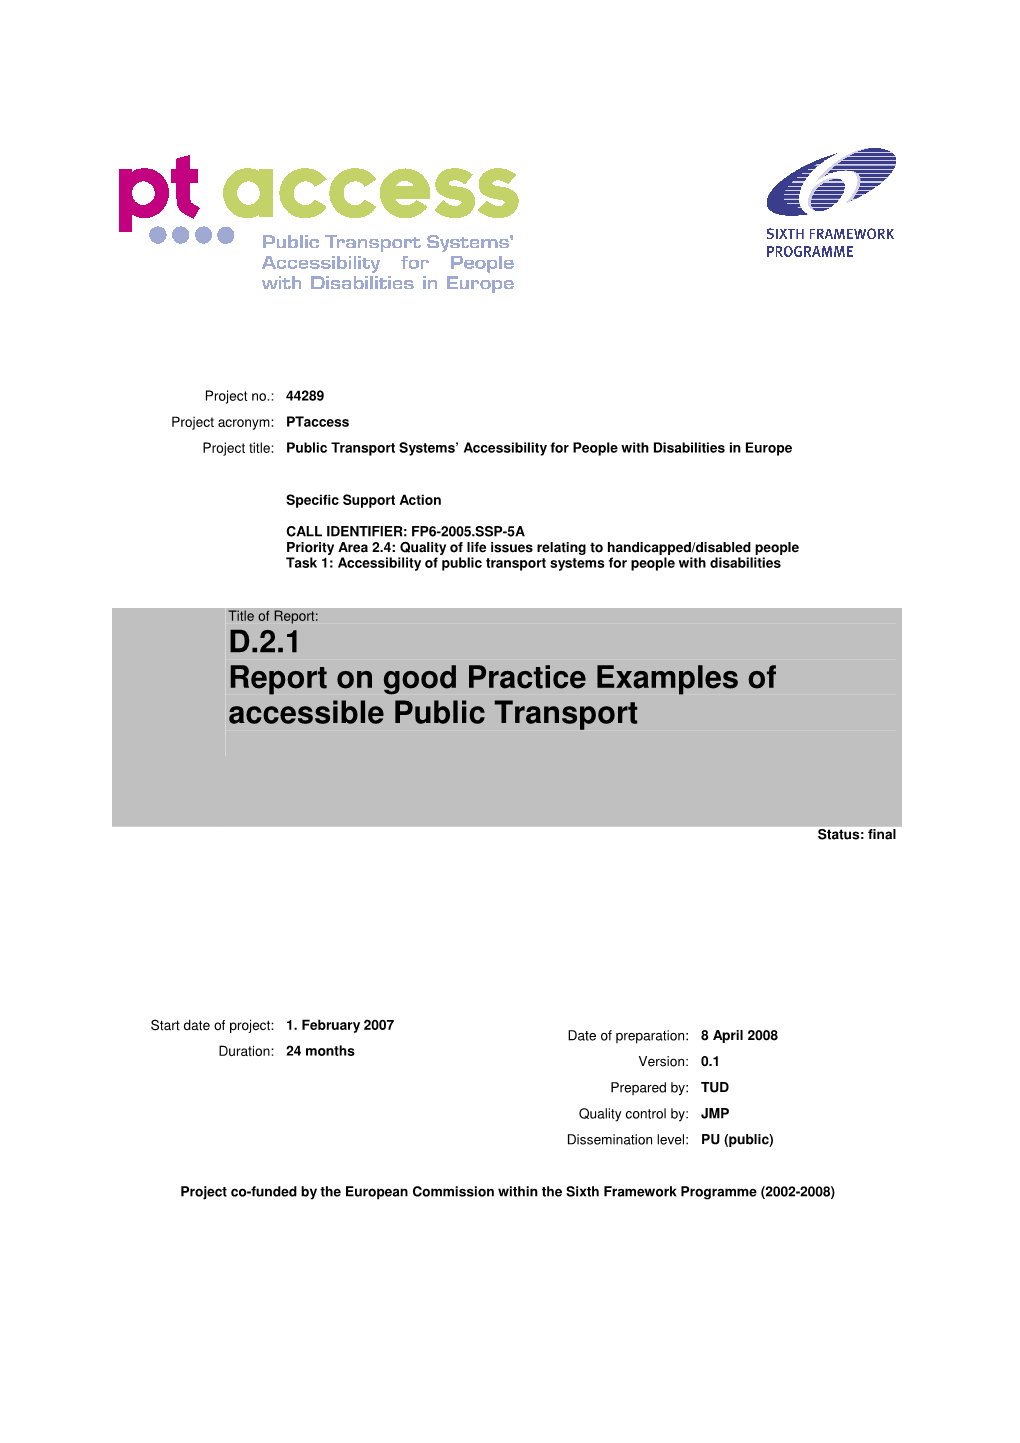 D.2.1 Report on Good Practice Examples of Accessible Public Transport